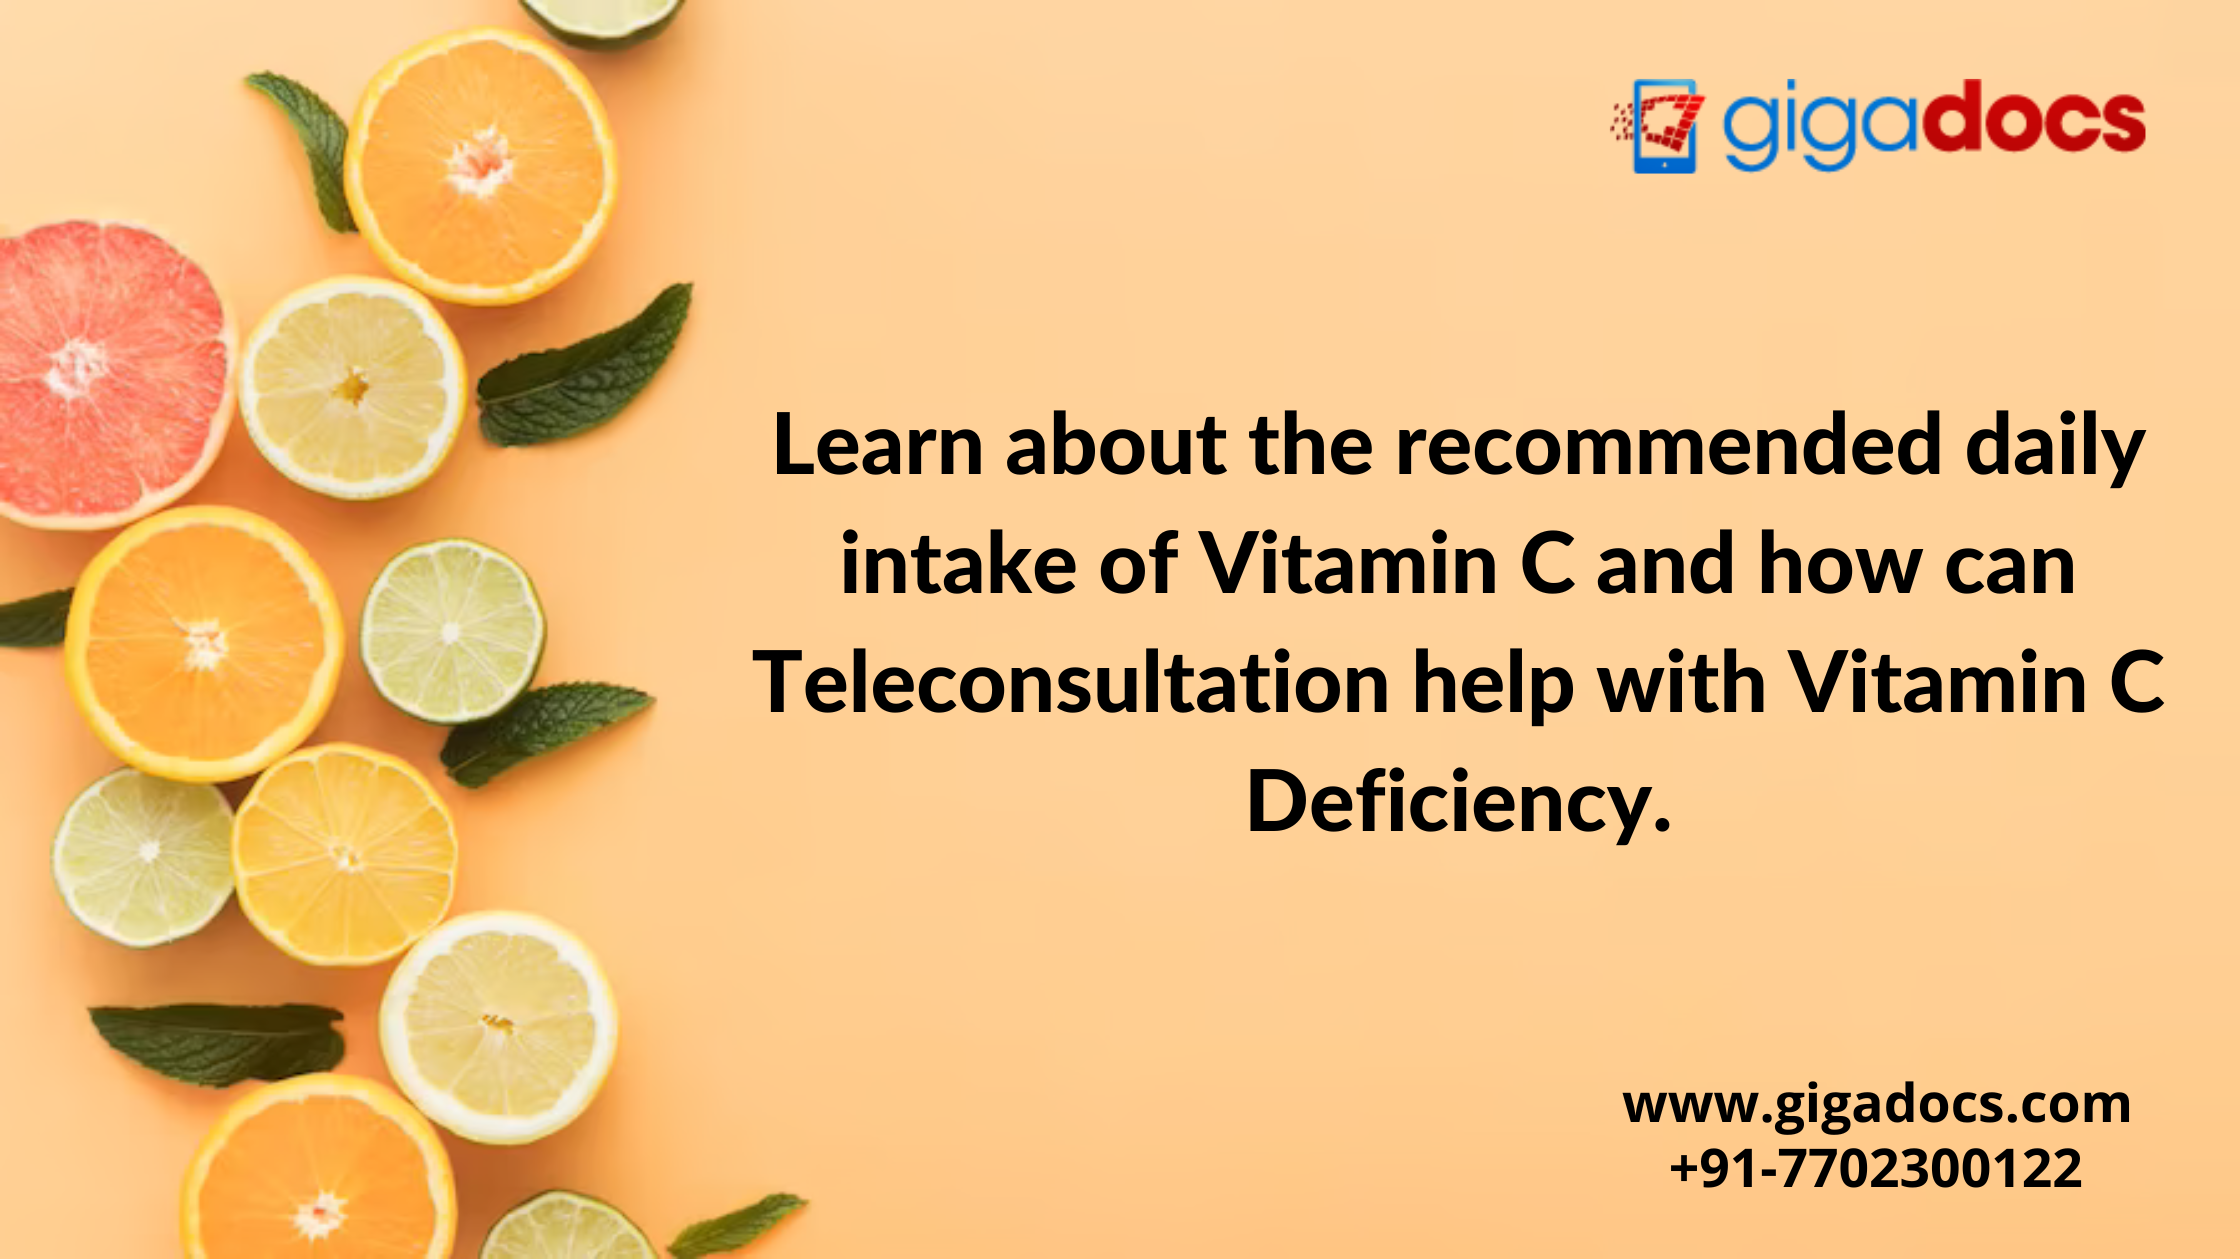 https://www.gigadocs.com/blog/wp-content/uploads/2023/04/how-can-Teleconsultation-help-with-Vitamin-C-Deficiency.png